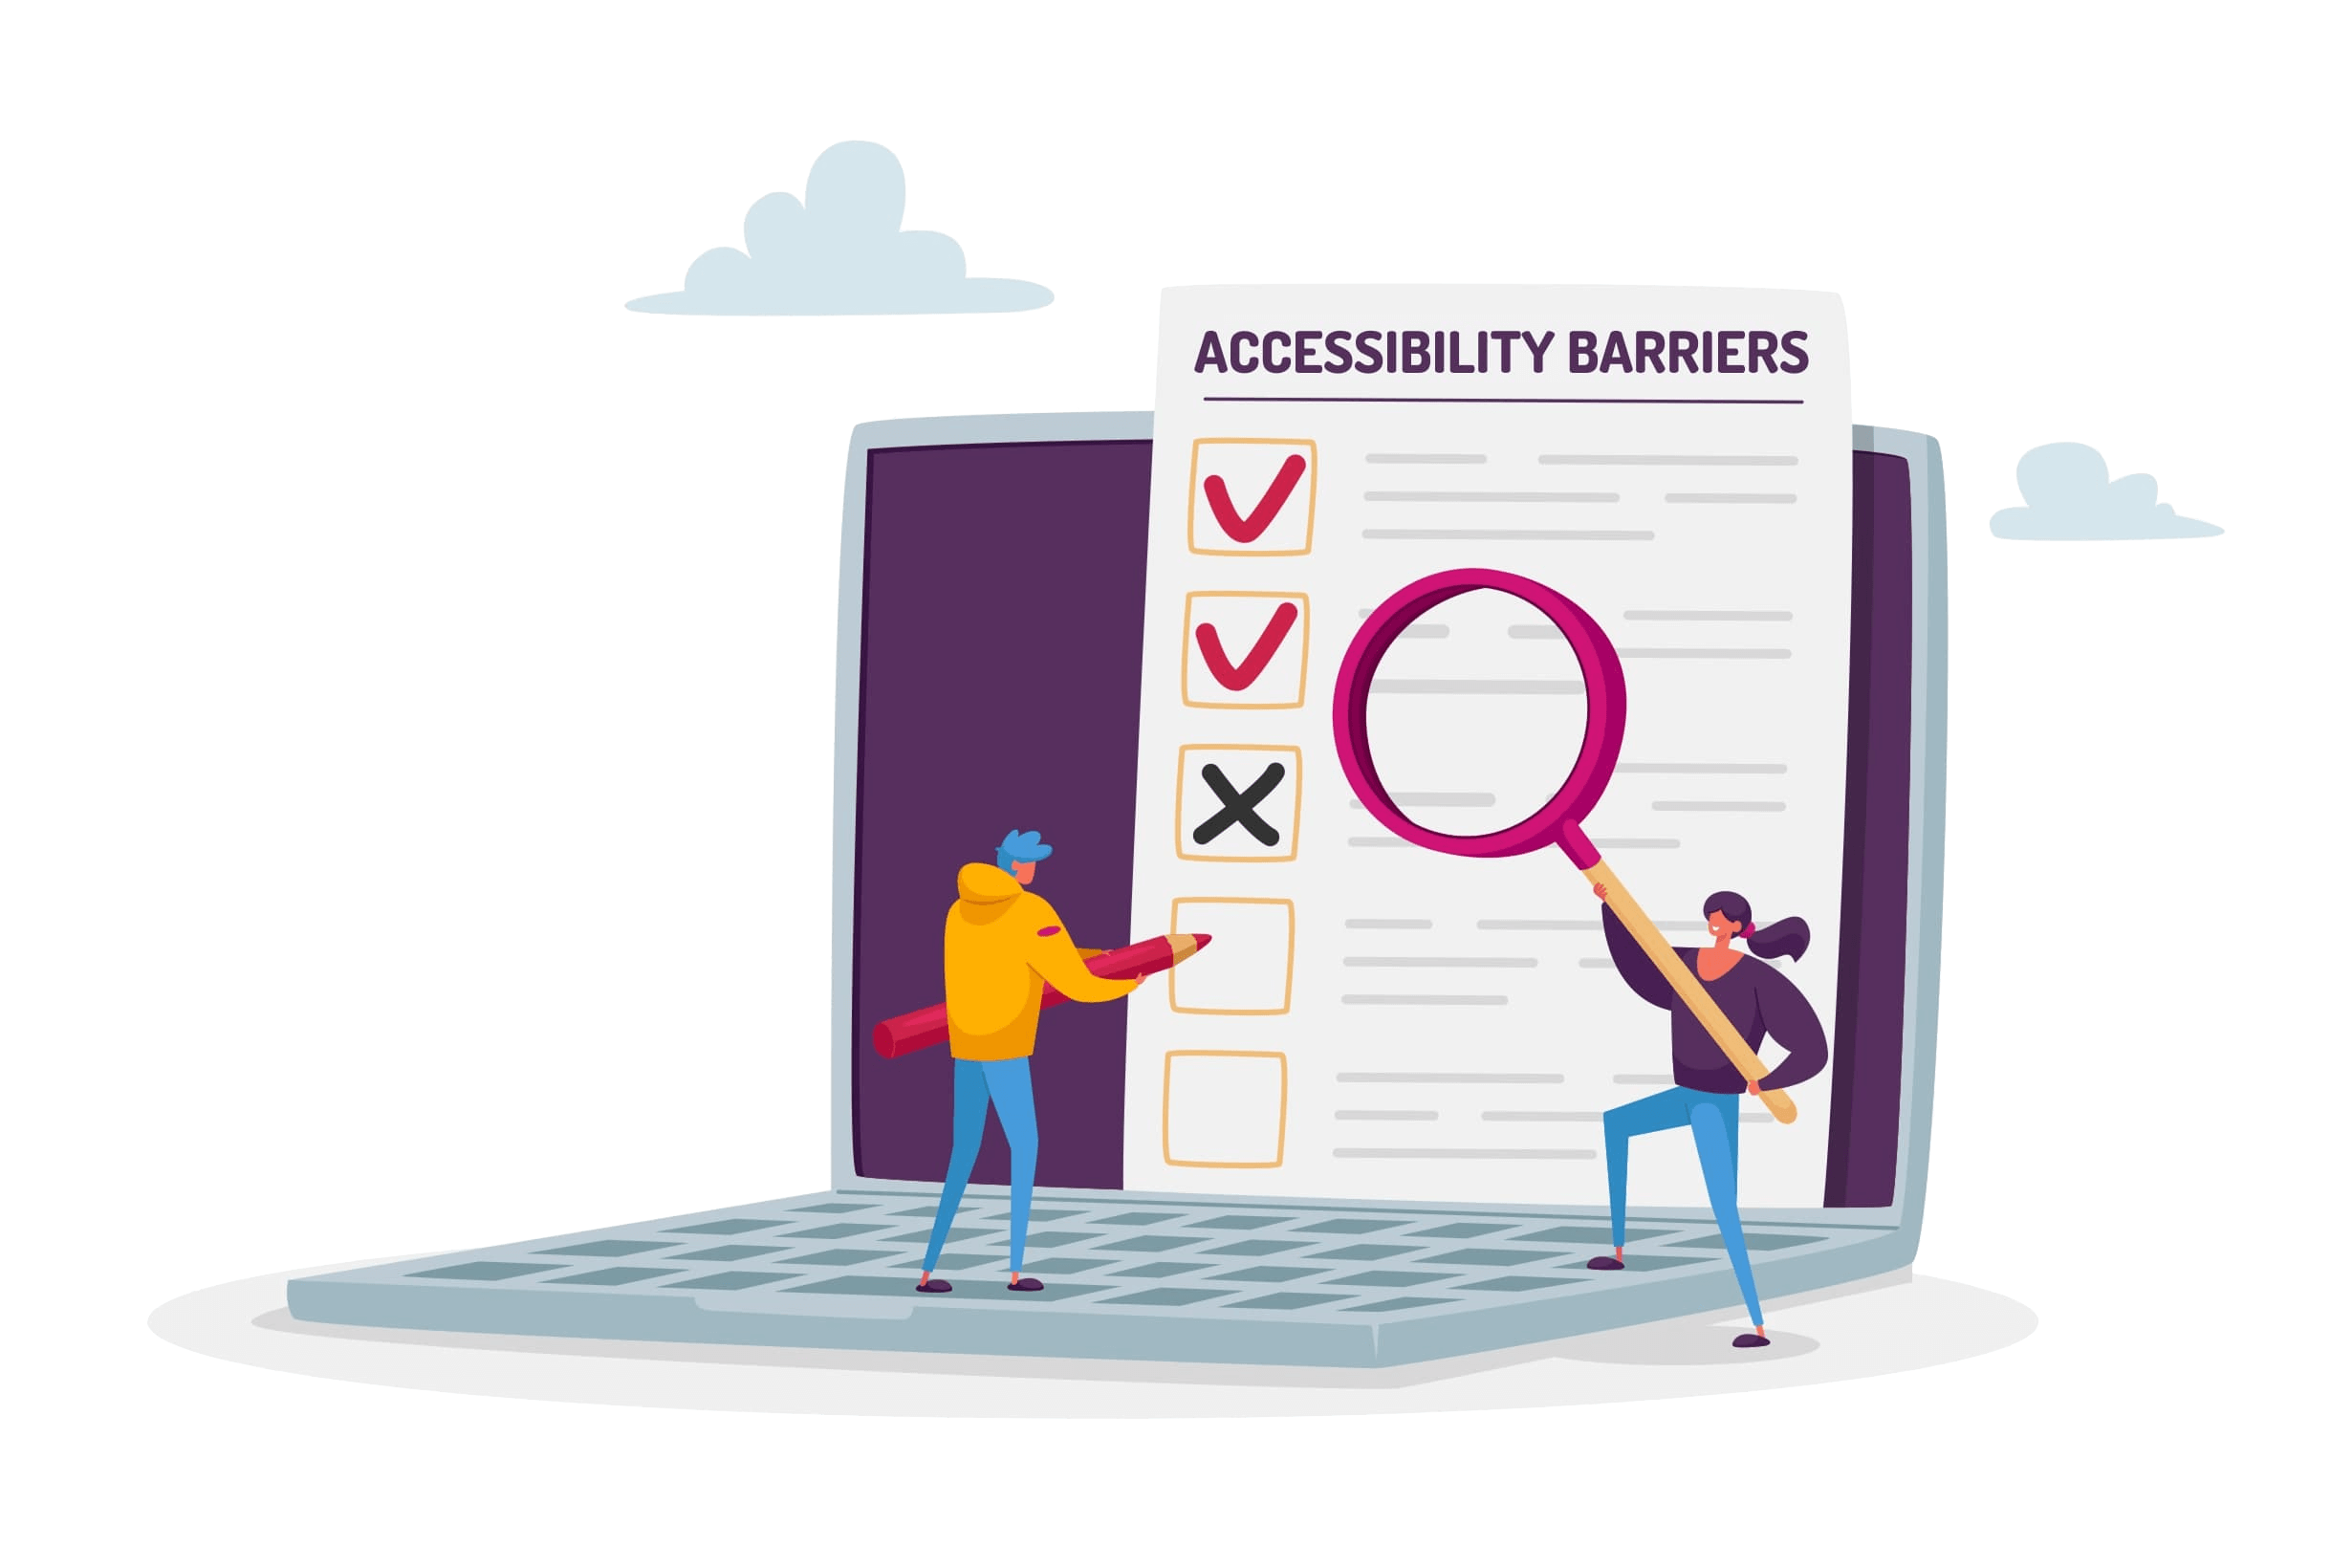 ACCESSIBILITY BARRIERS